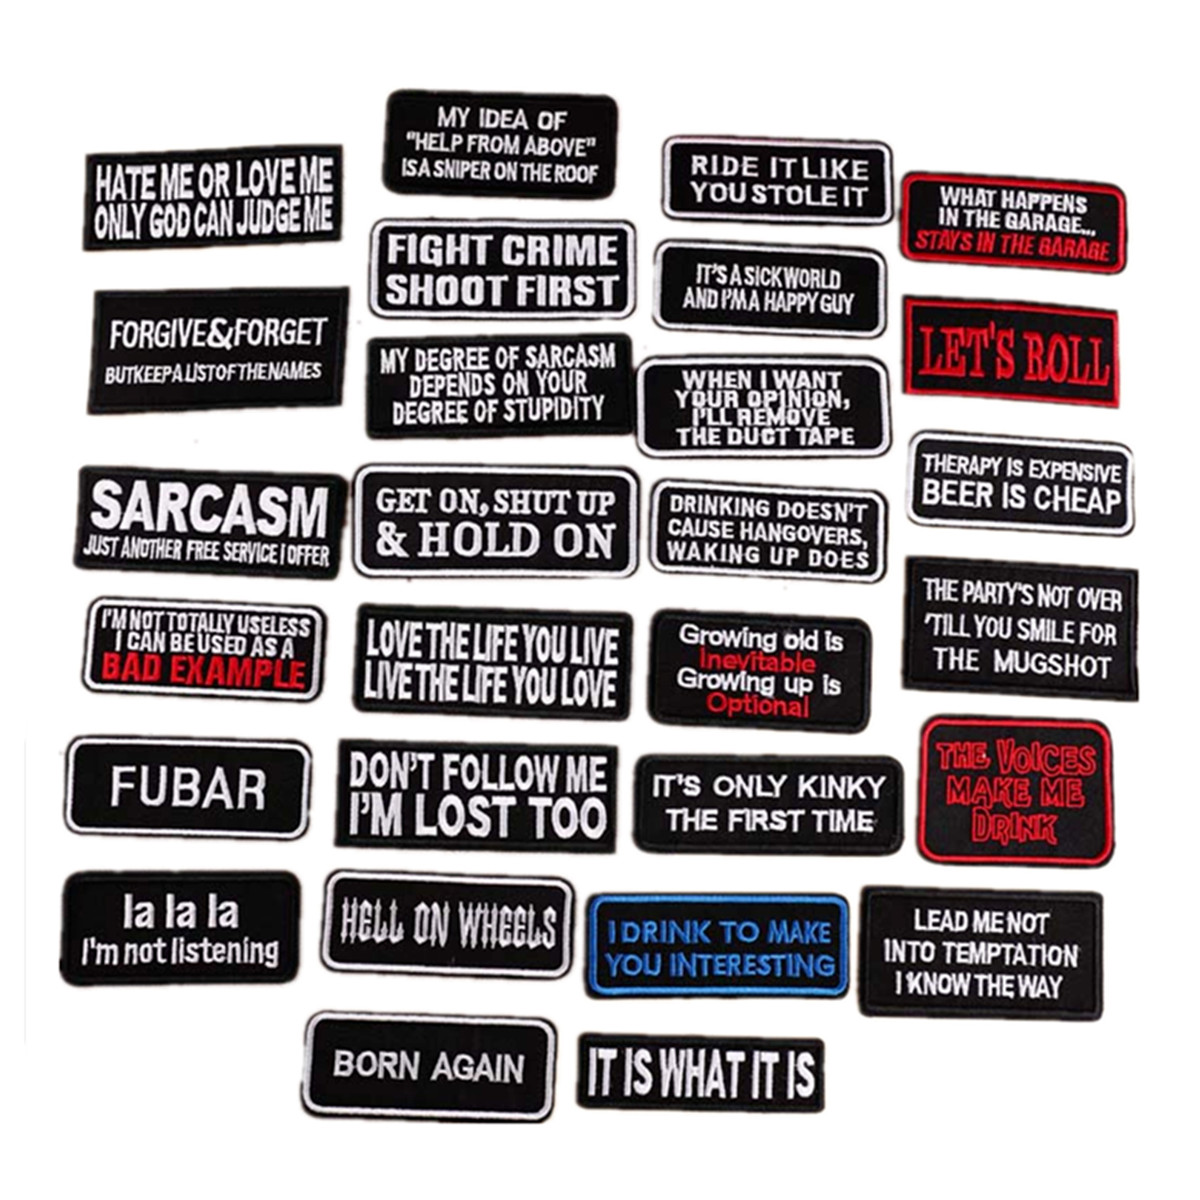 I LOVE MY COUNTRY BUT HATE MY BIKER SLOGAN NOVELTY MESSAGE SEW & IRON ON PATCH: 